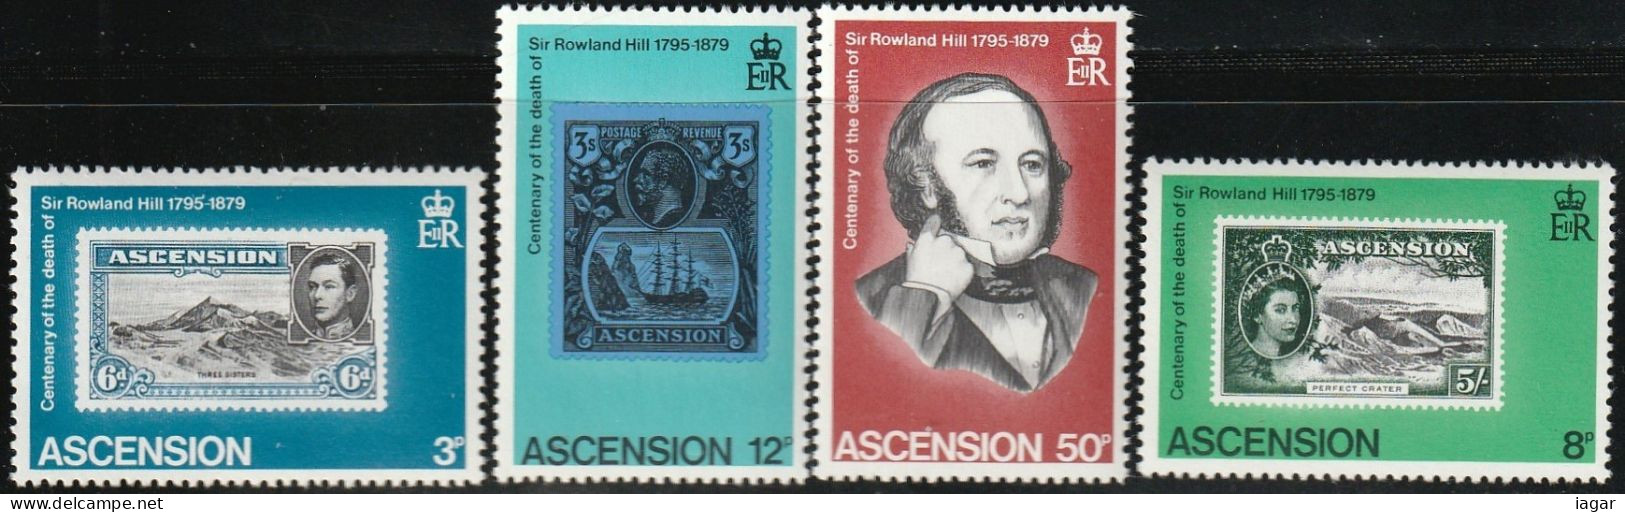 THEMATIC STAMP ON STAMP:  DEATH CENTENARY OF ROWLAND HILL   -  ASCENSION - Südamerika